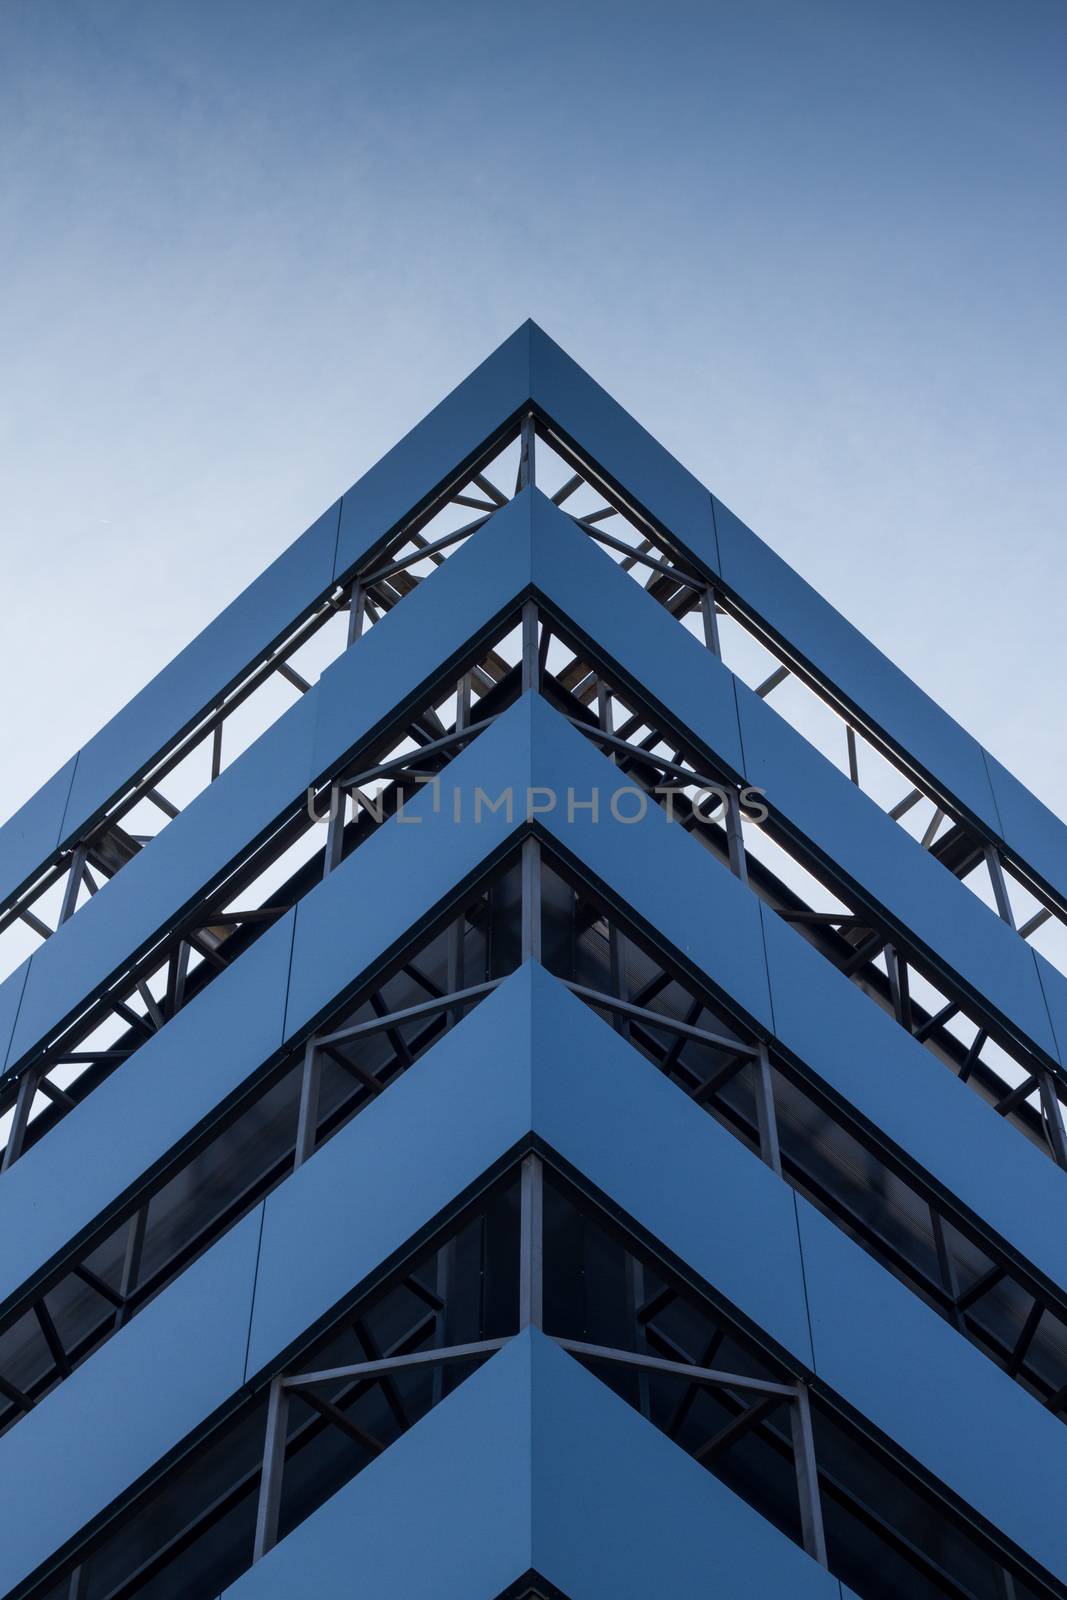 modern offices of glass and steel. architecture details